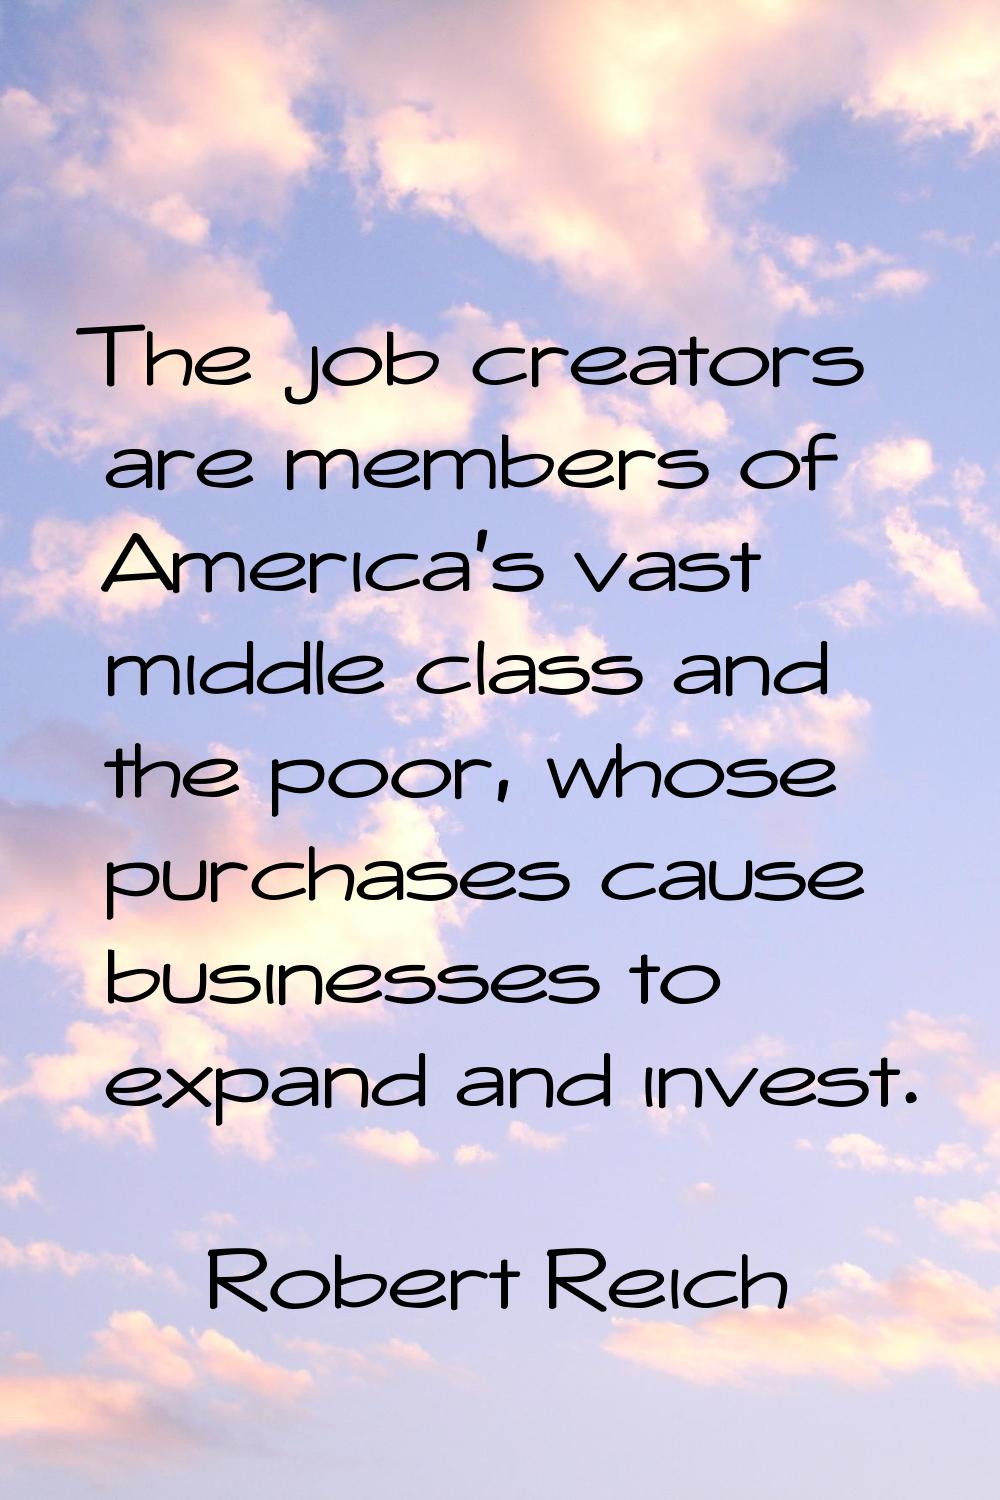 The job creators are members of America's vast middle class and the poor, whose purchases cause bus